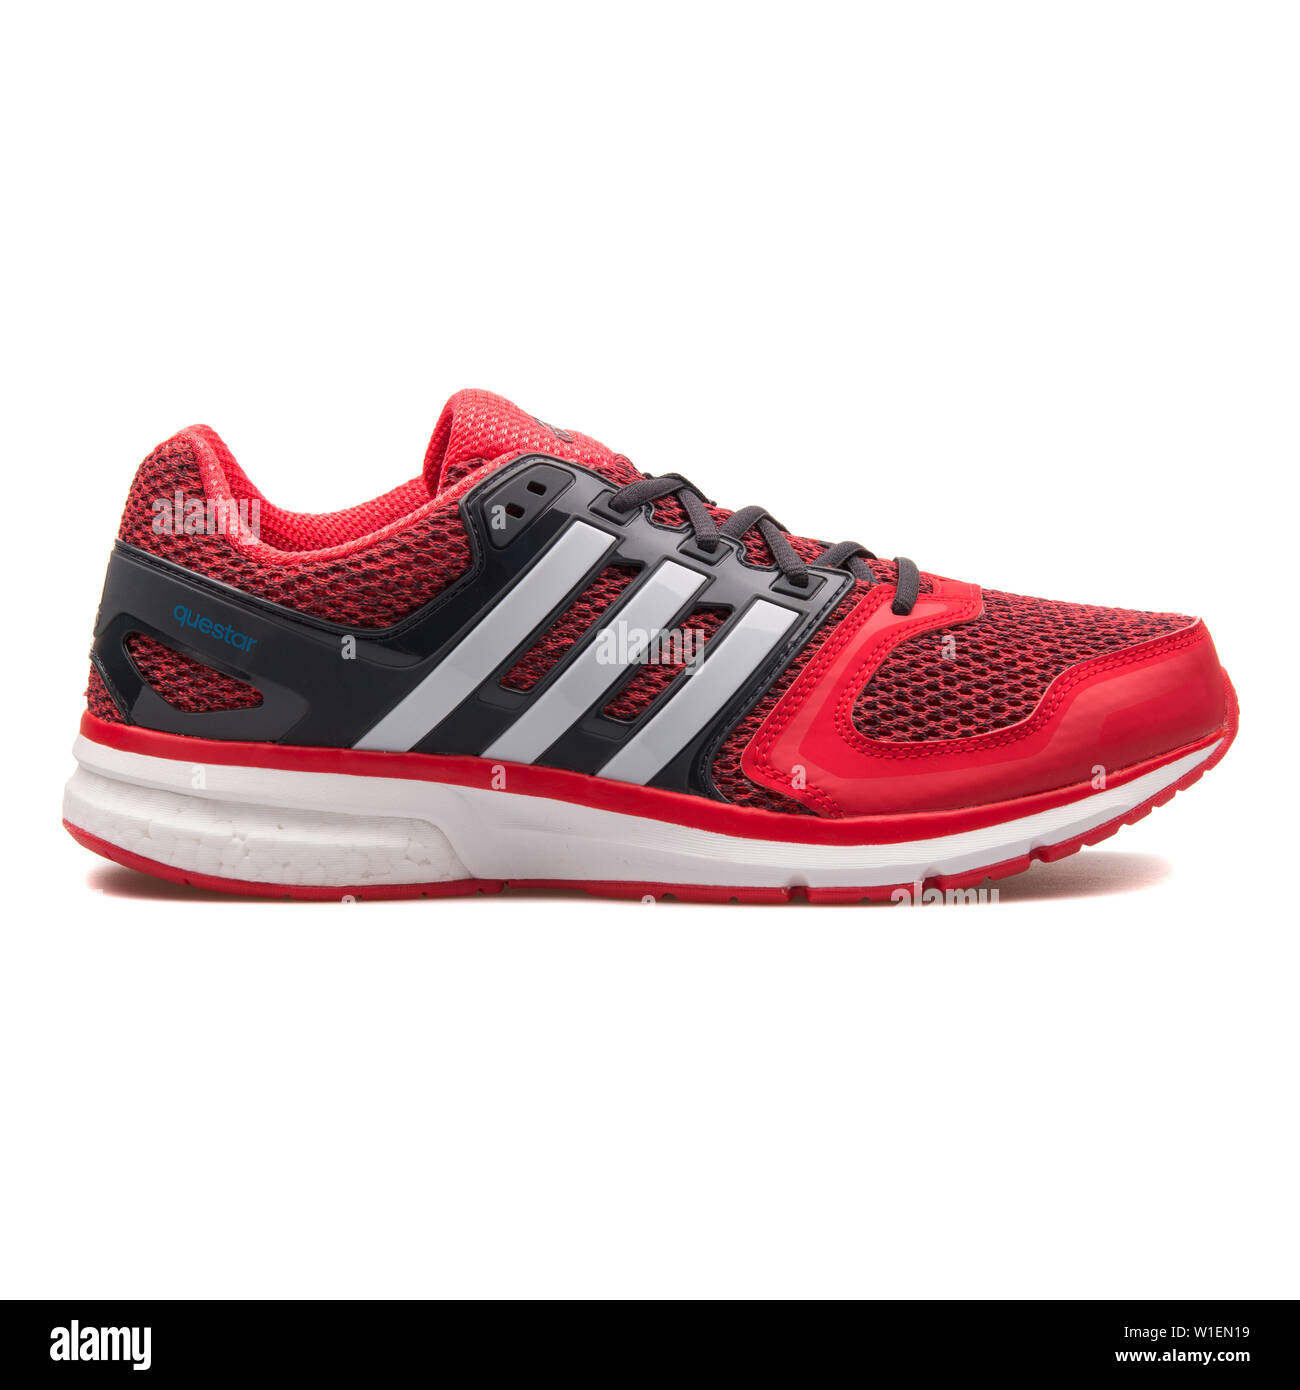 VIENNA, AUSTRIA - AUGUST 30, 2017: Adidas Questar red and black sneaker on  white background Stock Photo - Alamy